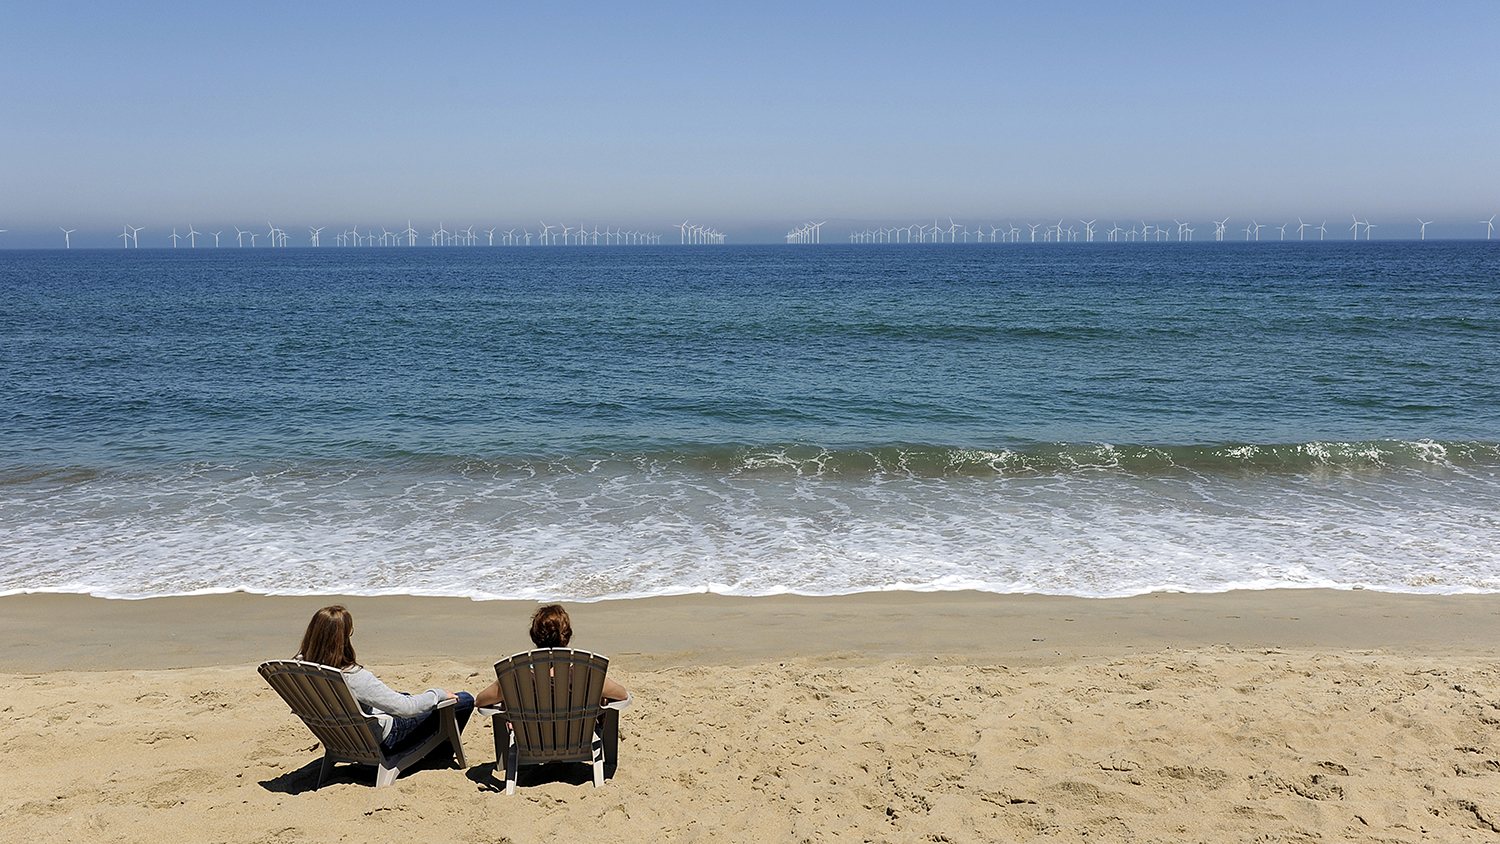 Two people on beach with wind farm in the distance.